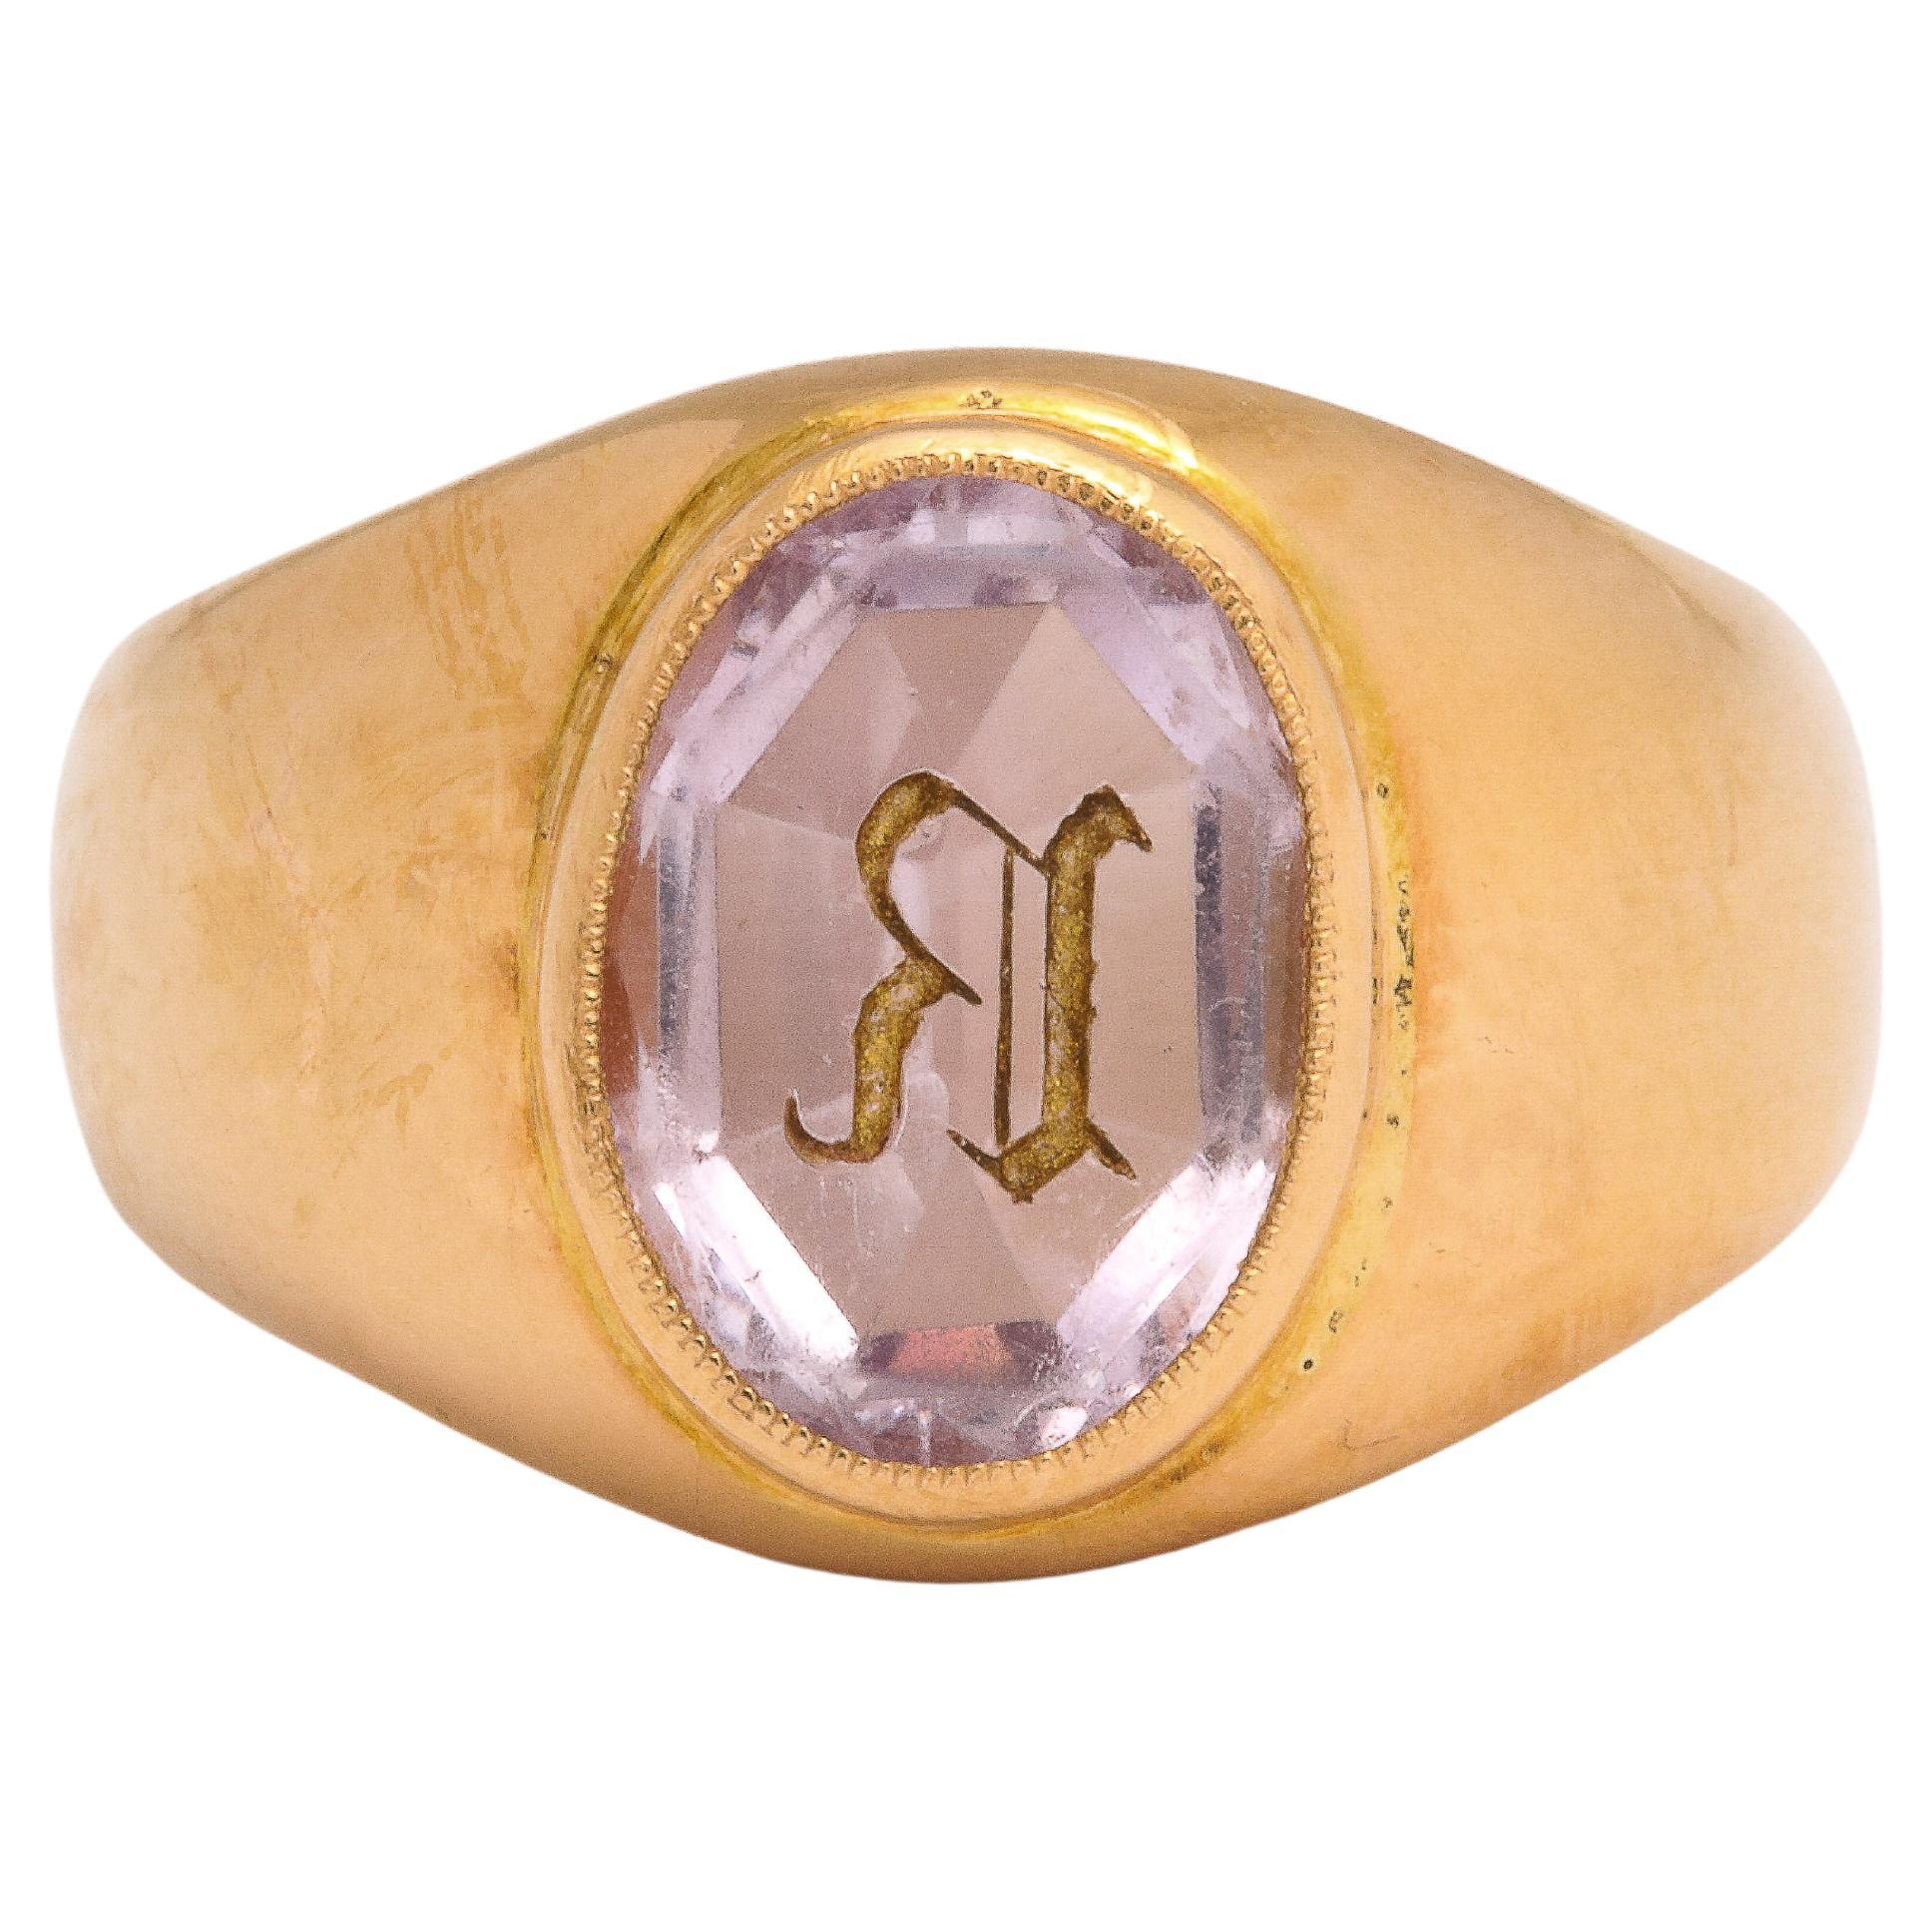 Antique French 18 kt Gold Signet Ring with Amethyst